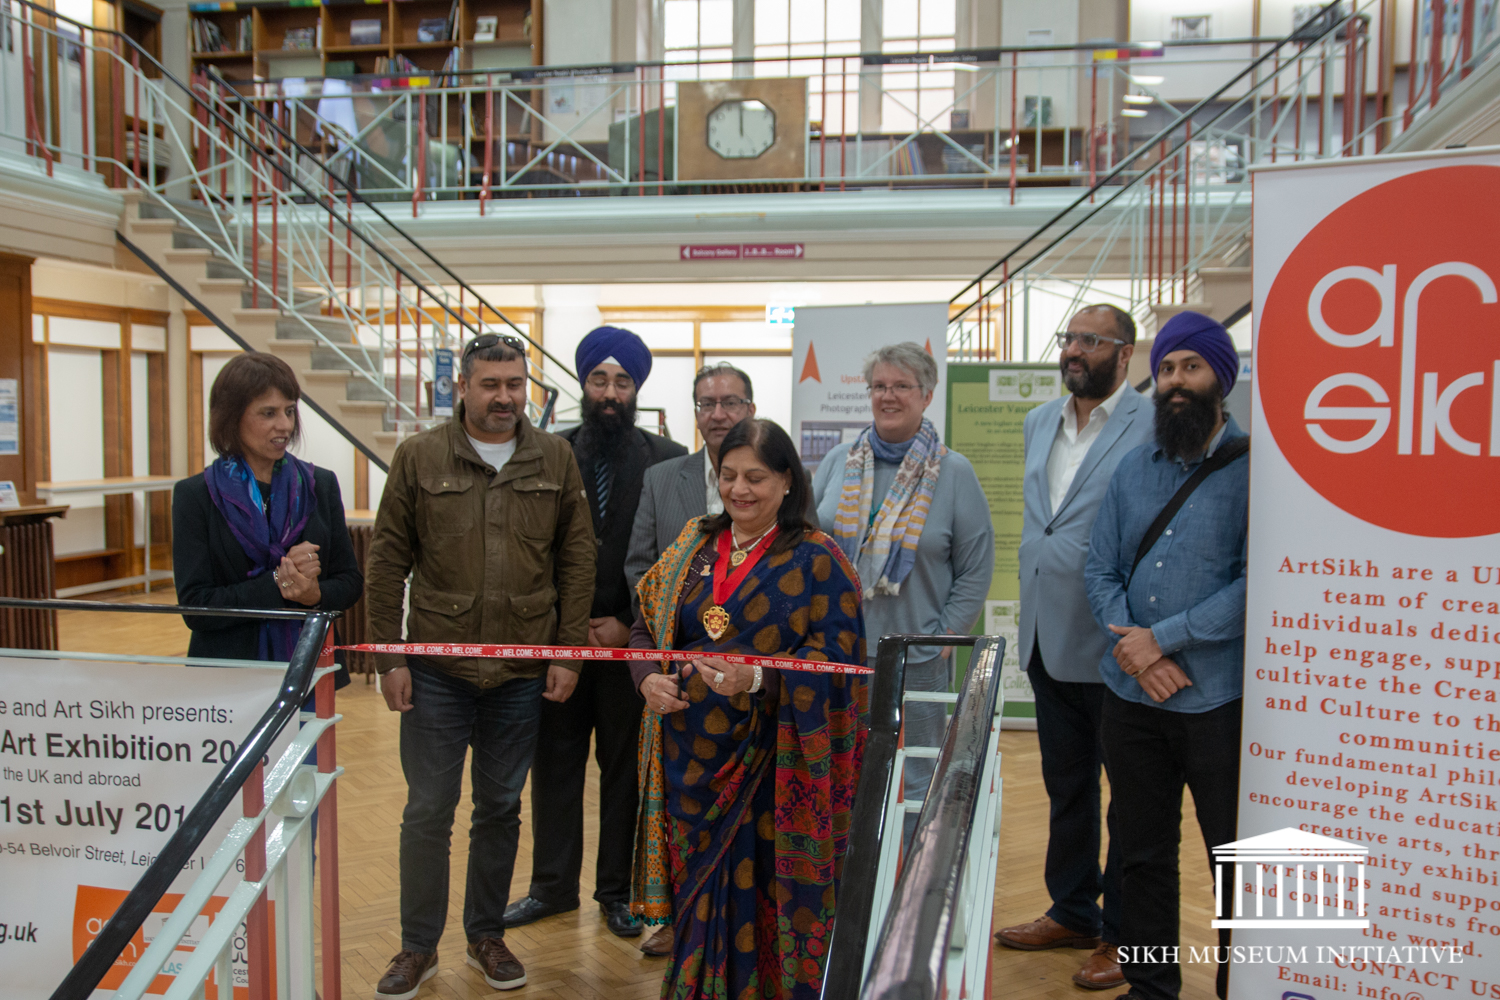 Visionary Sikh Art exhibition launches in Leicester